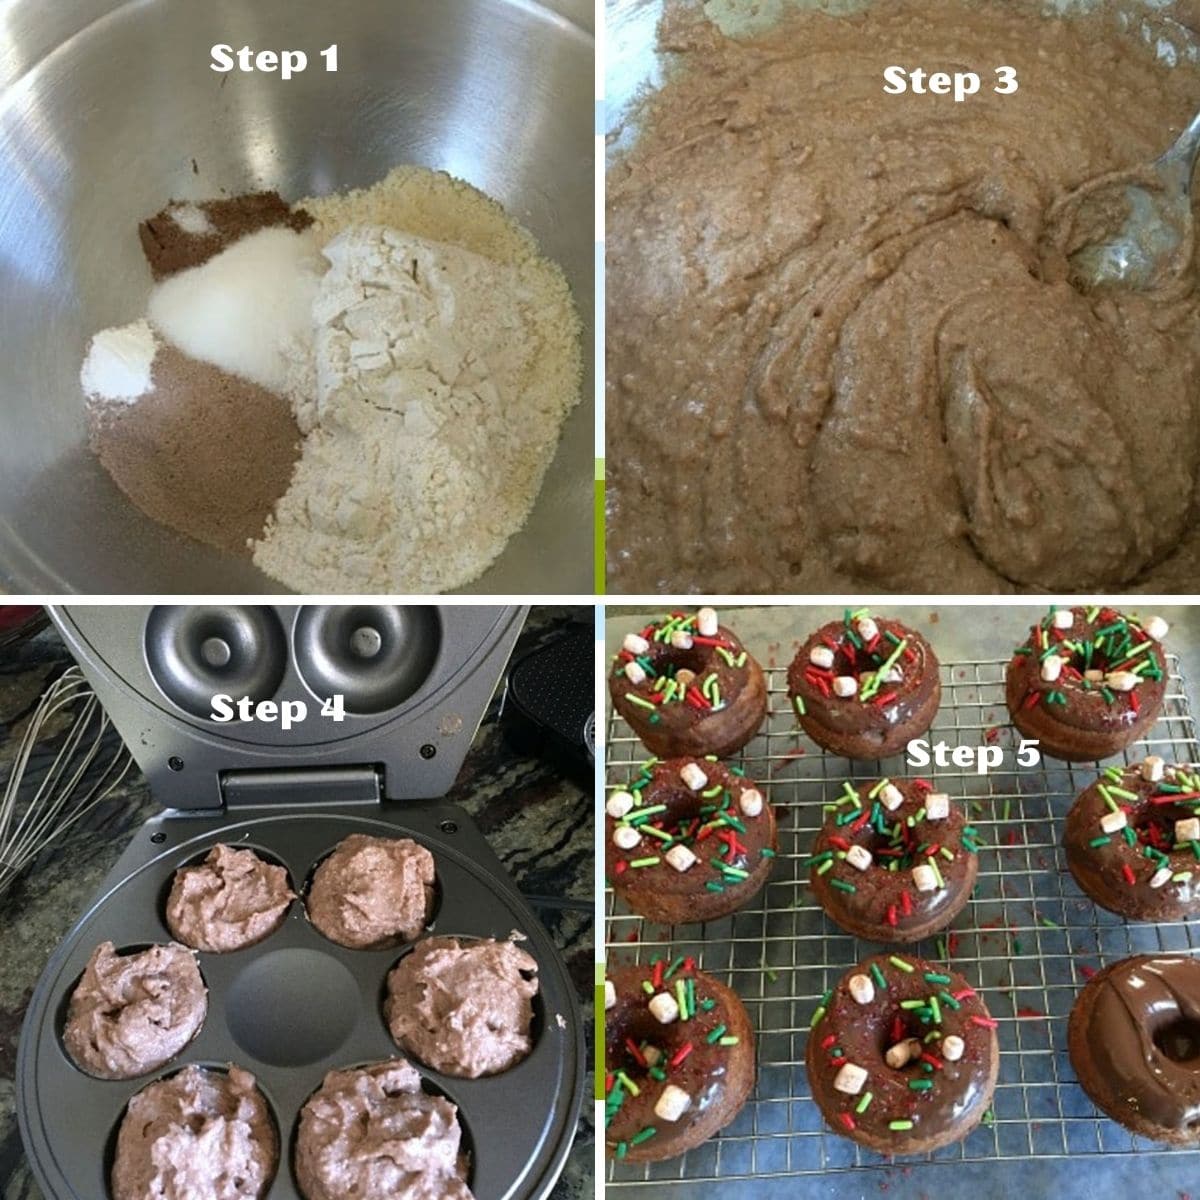 Step by step recipe photos making the donuts.